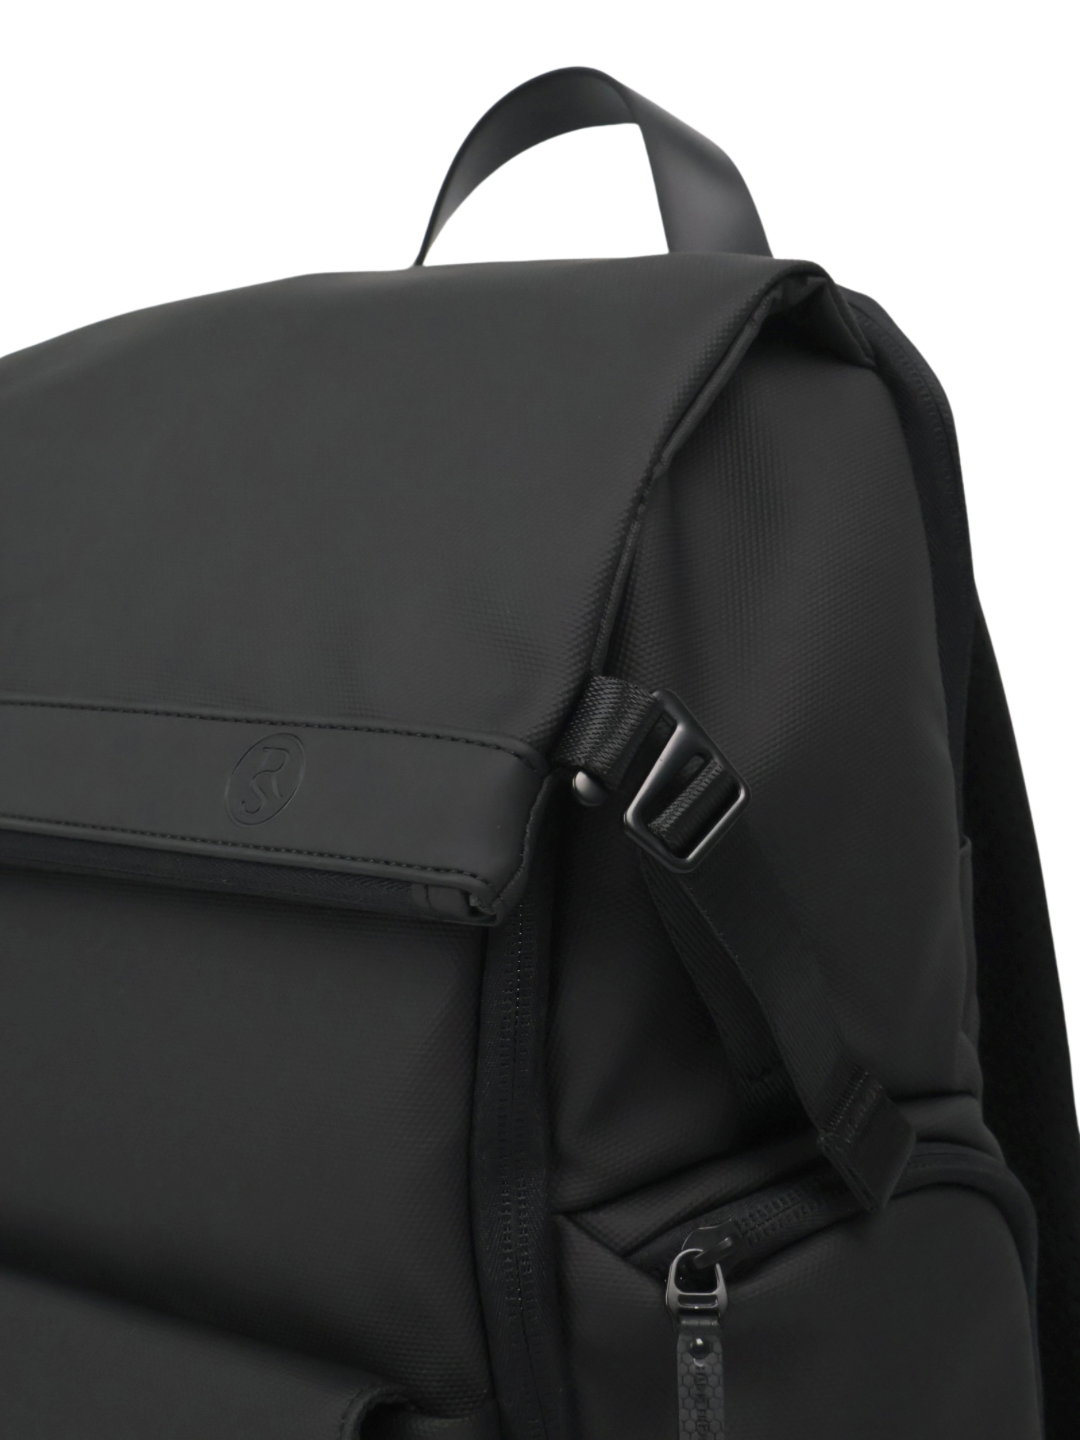 Tomy Commuter Travel Backpack